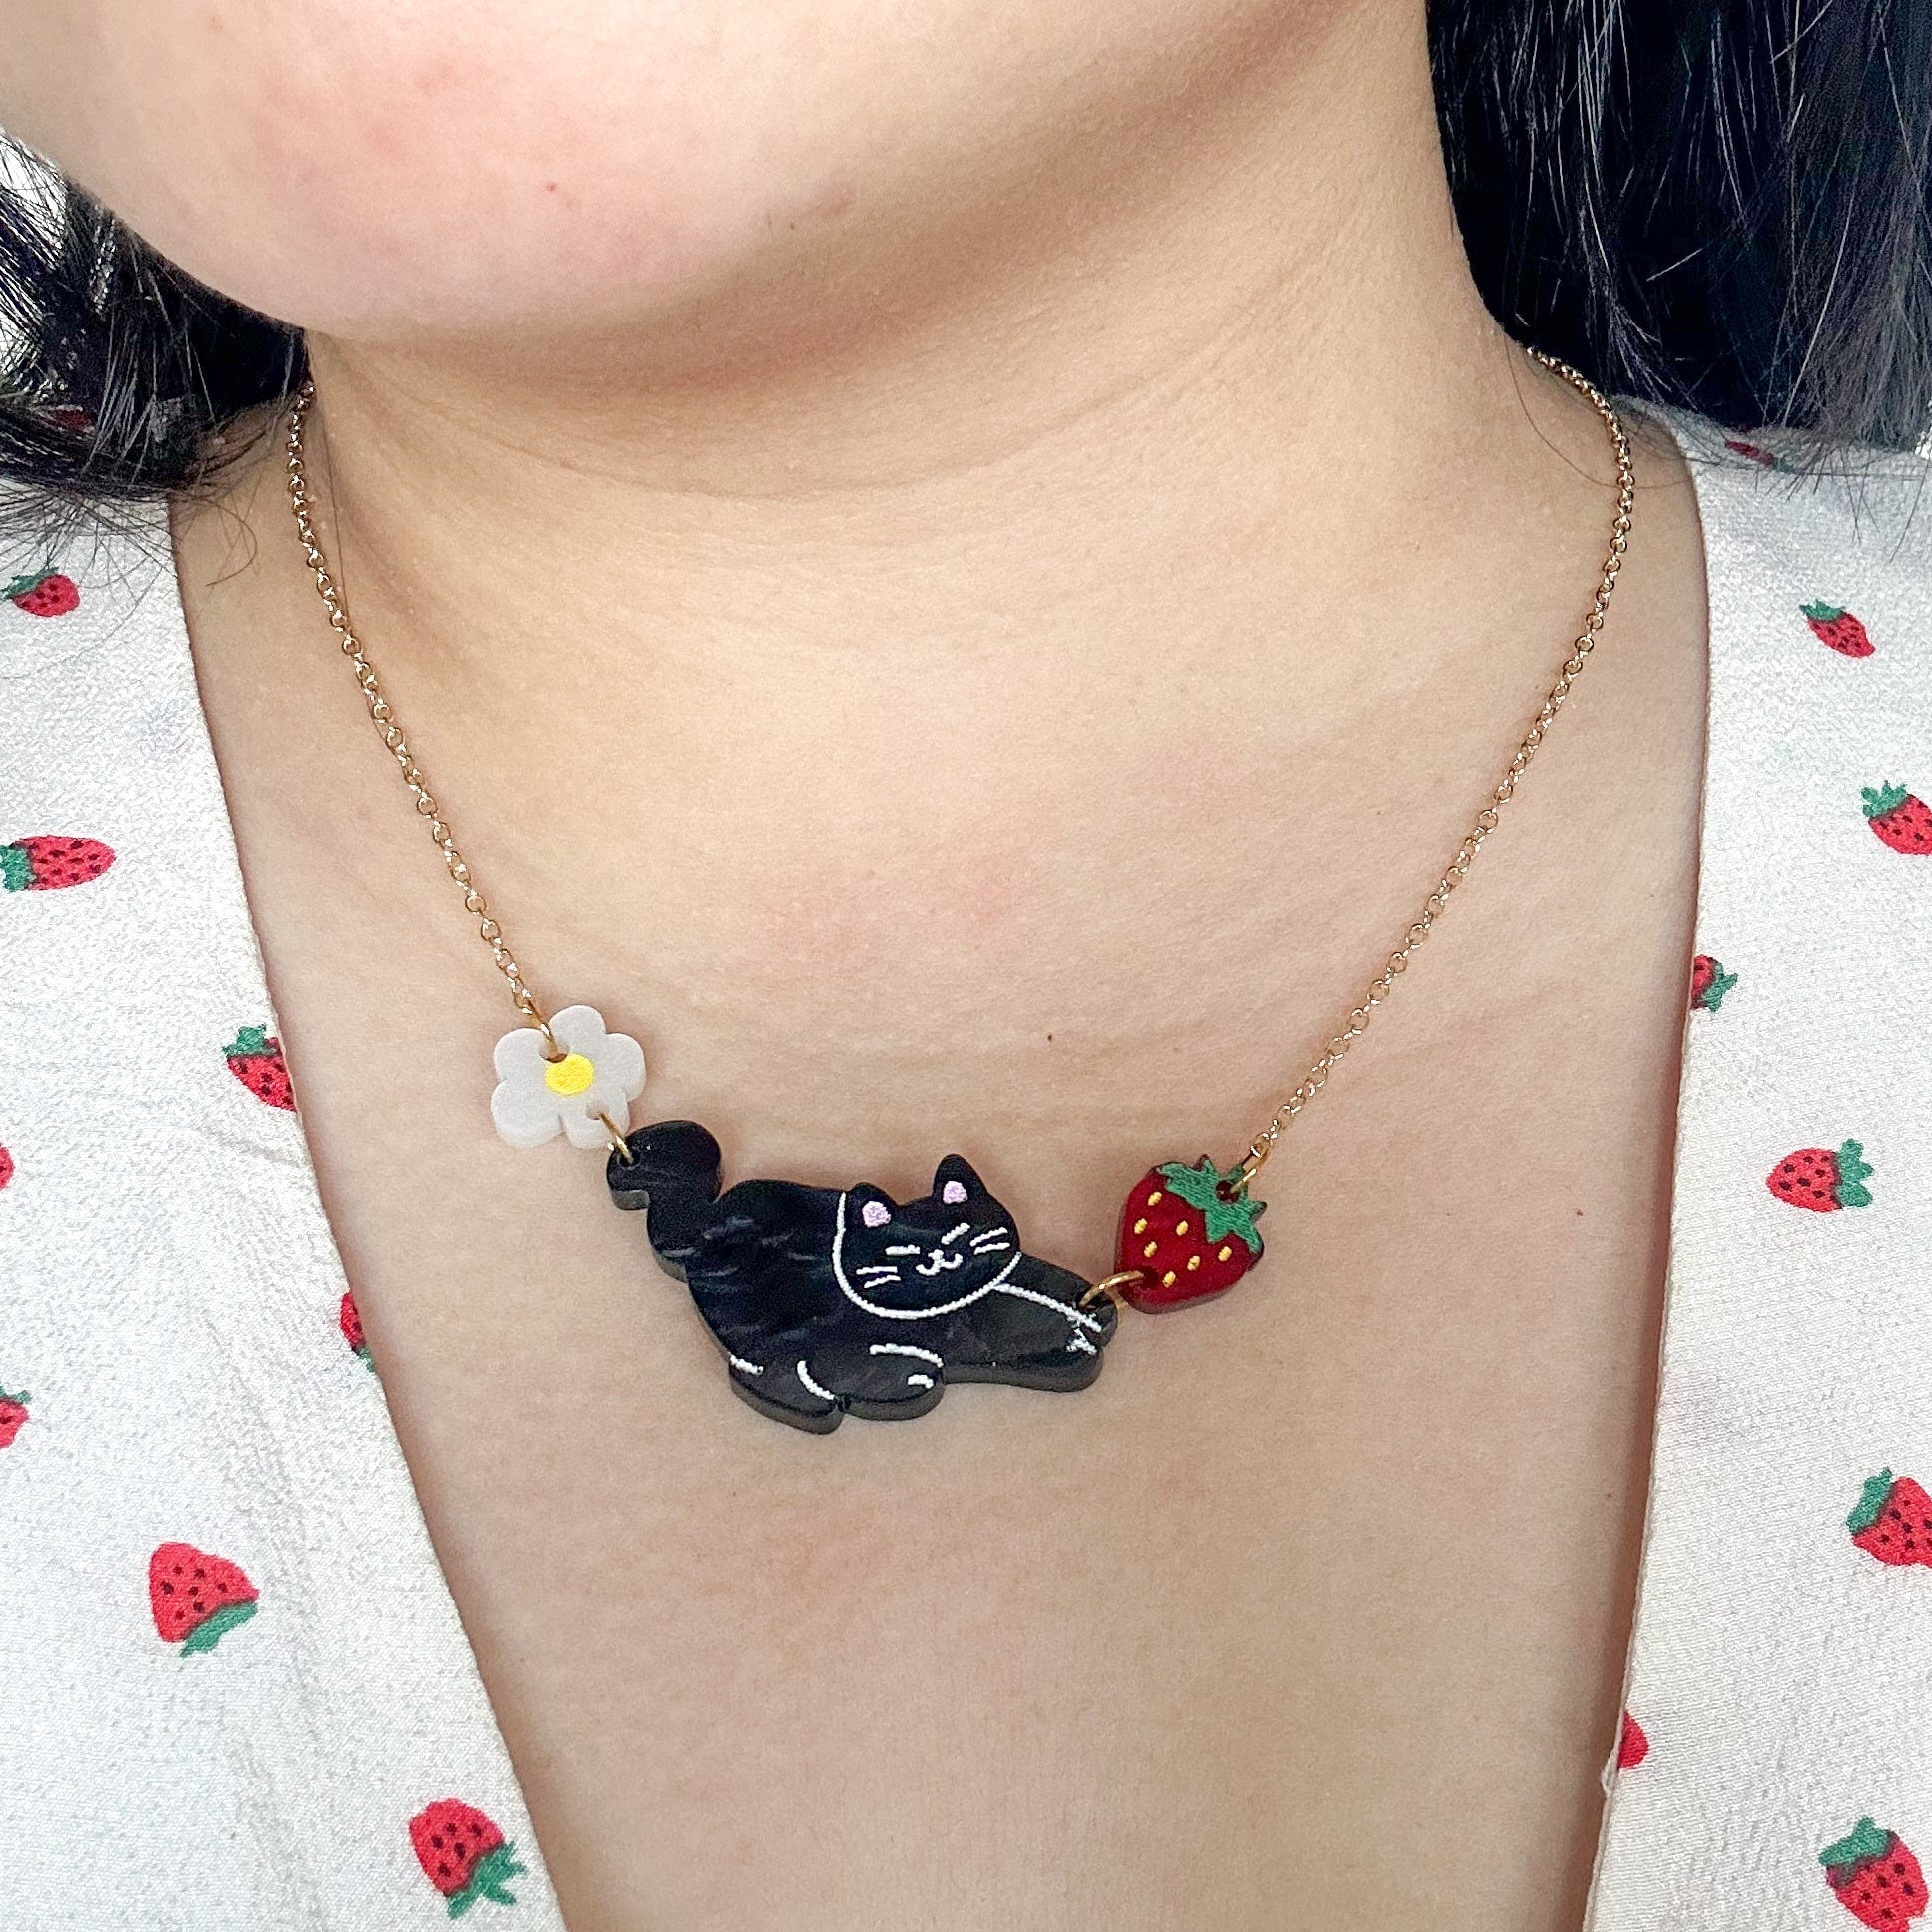 Kitties Necklace//Cat Necklace//Statement Necklace//Acrylic Necklace//Cute Cat Necklace//Animal//Cute Necklace//Gift for Her